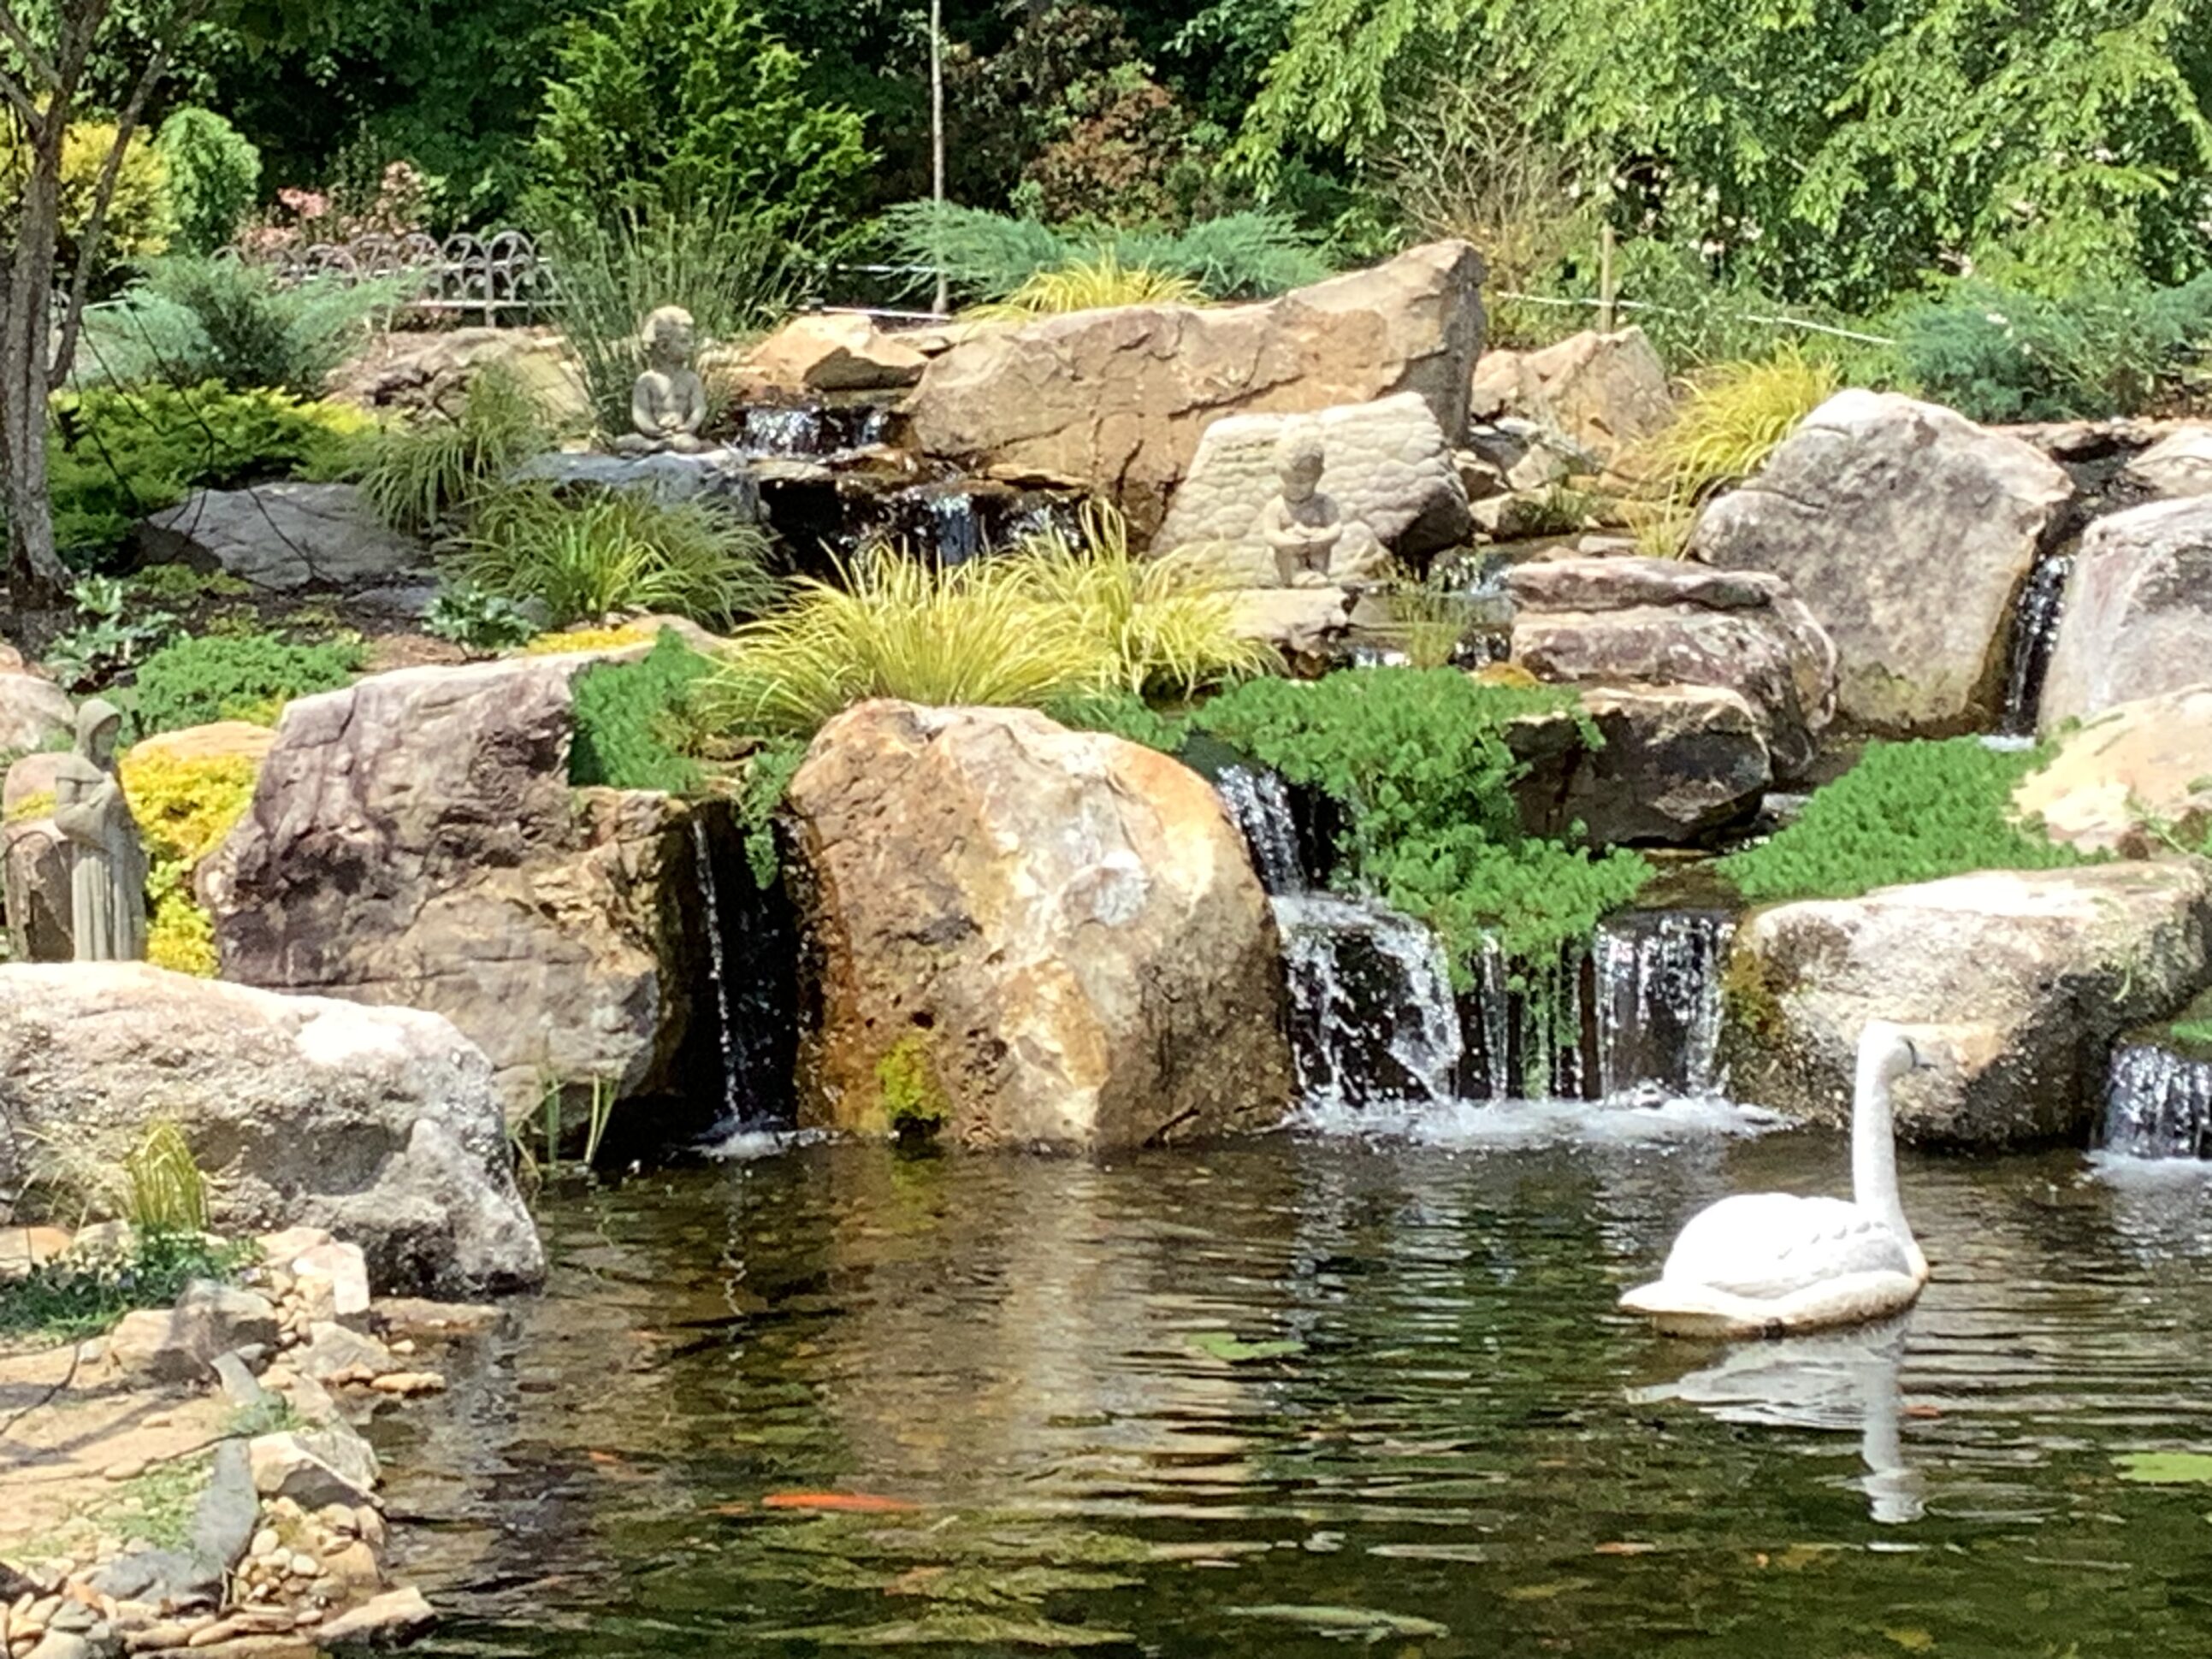 A swan swimming in the water near rocks and grass.